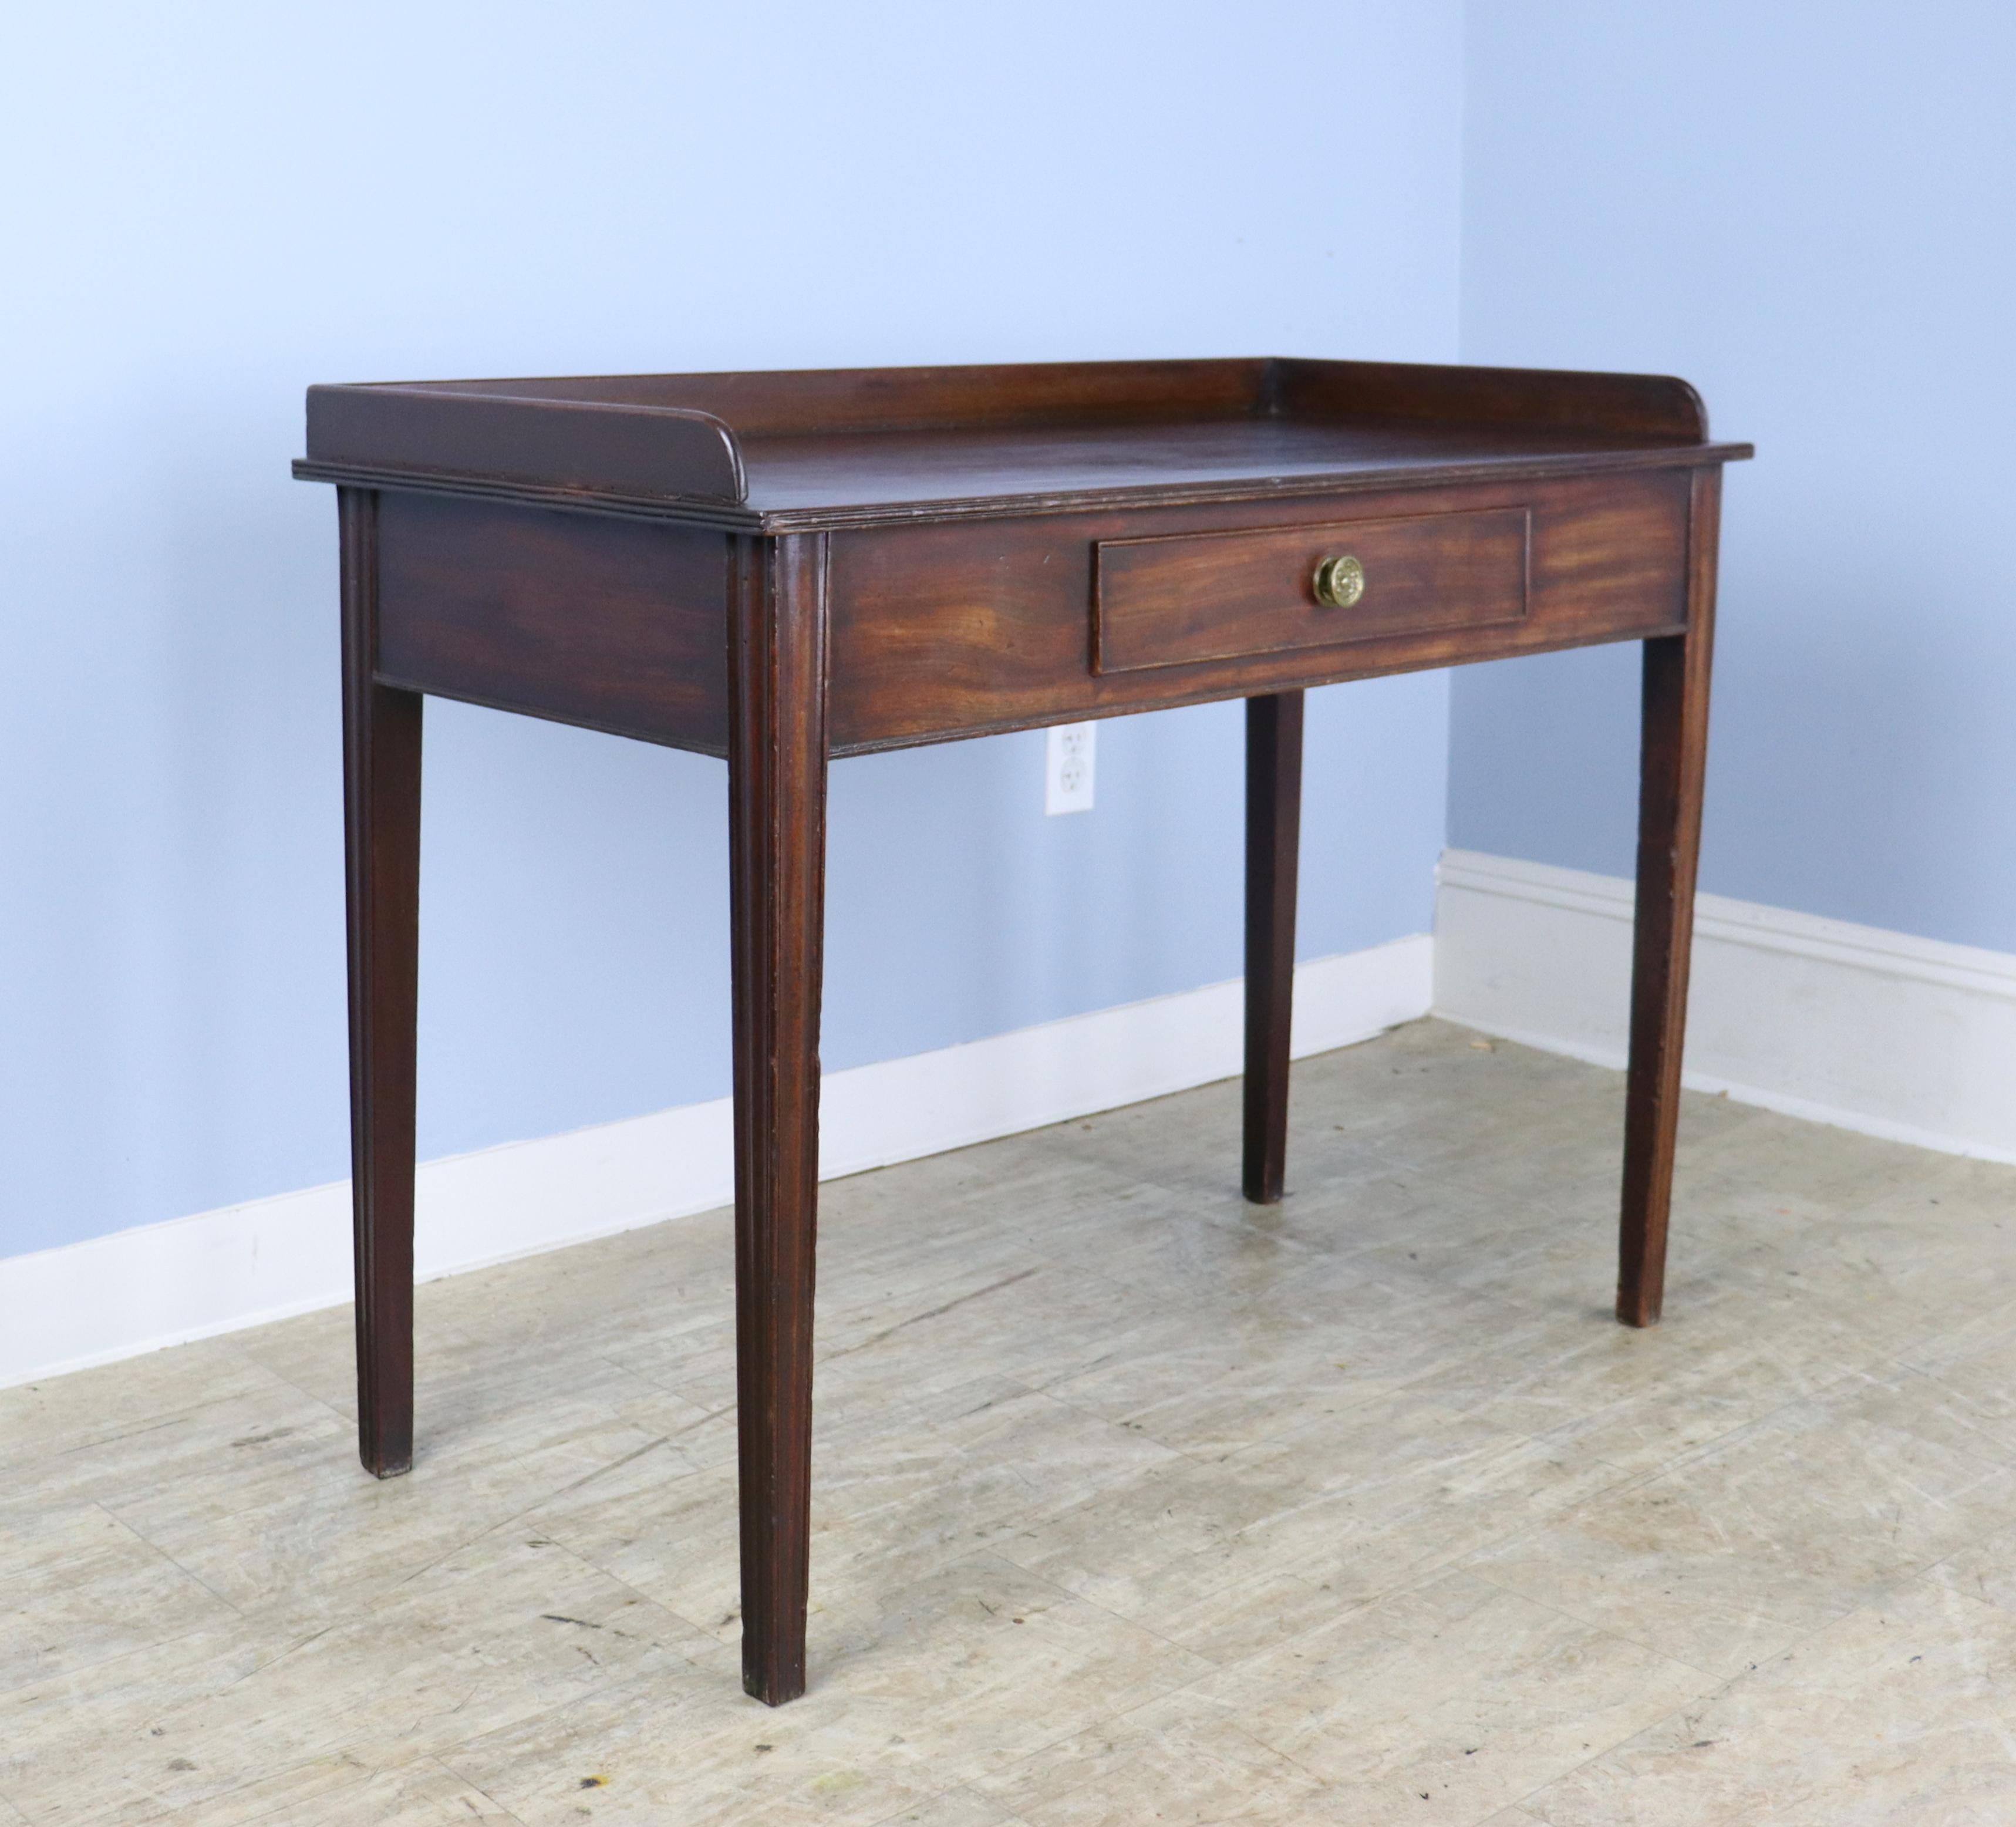 An 18th Century mahogany writing table with galleried back, reeded edge on the top, and a single wide drawer.  There is a bit of old wear on the top, highlighted in image #10.  In good sturdy condition.  No wobbling.  The height measurement is for